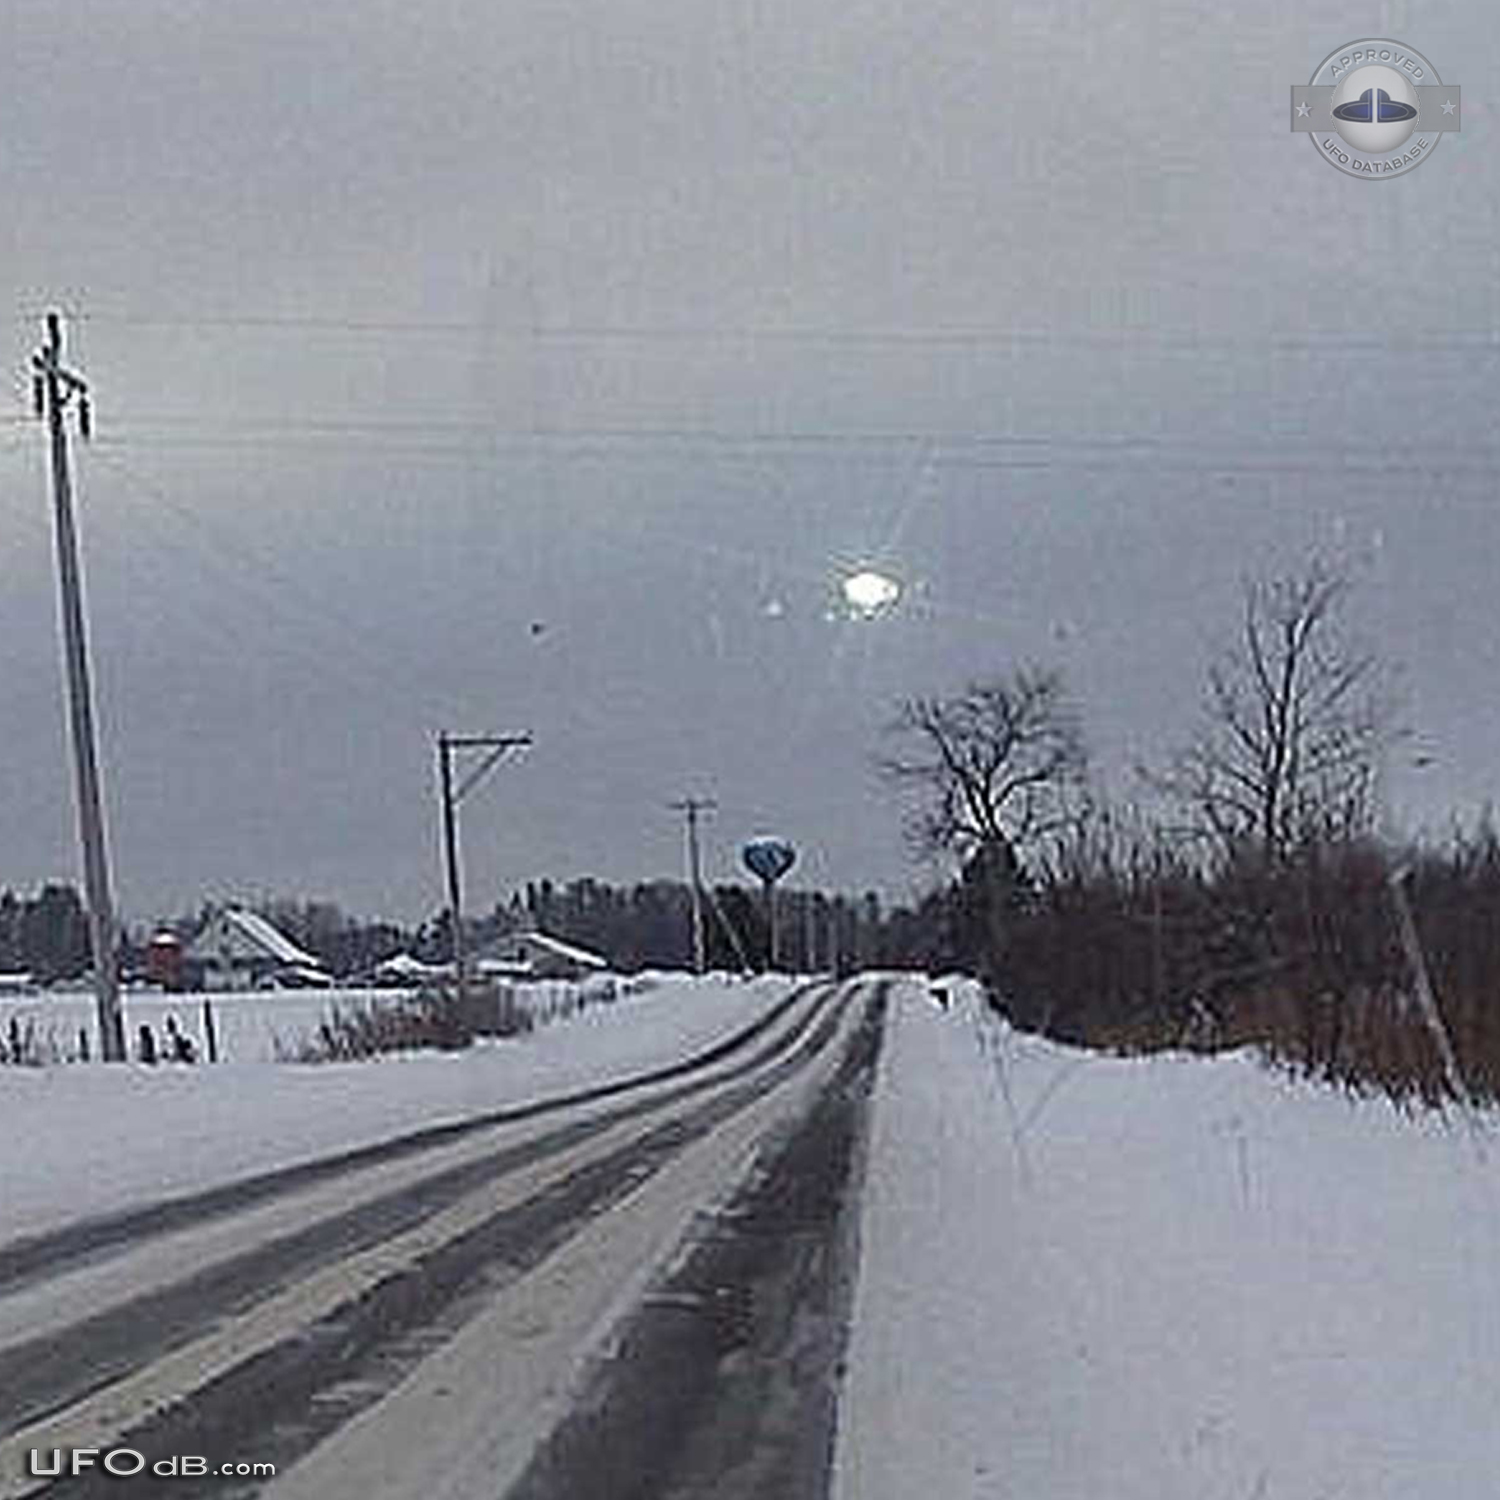 Very bright UFO caught on picture in Hayward Wisconsin USA - 2010 UFO Picture #432-2